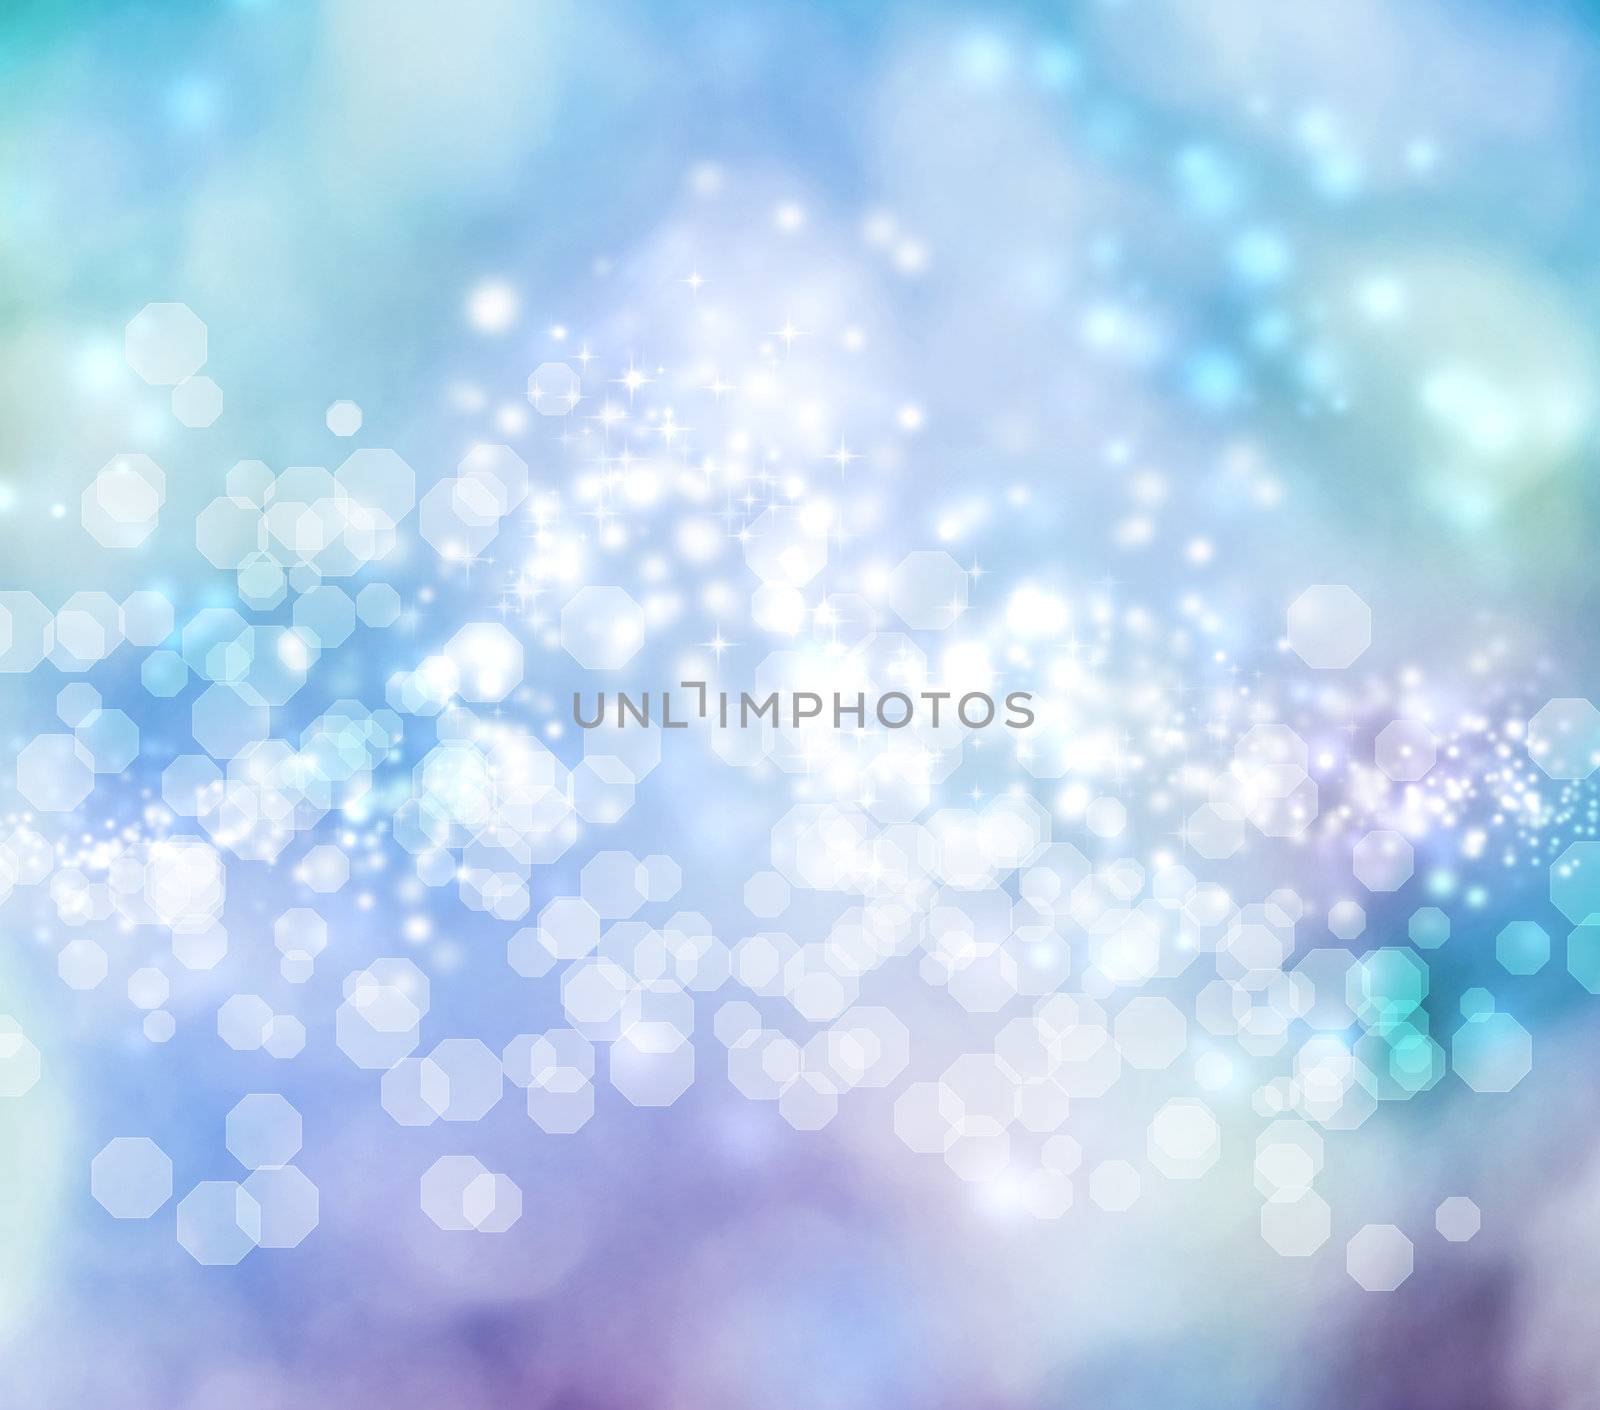 Blue Colored Abstract Lights Background